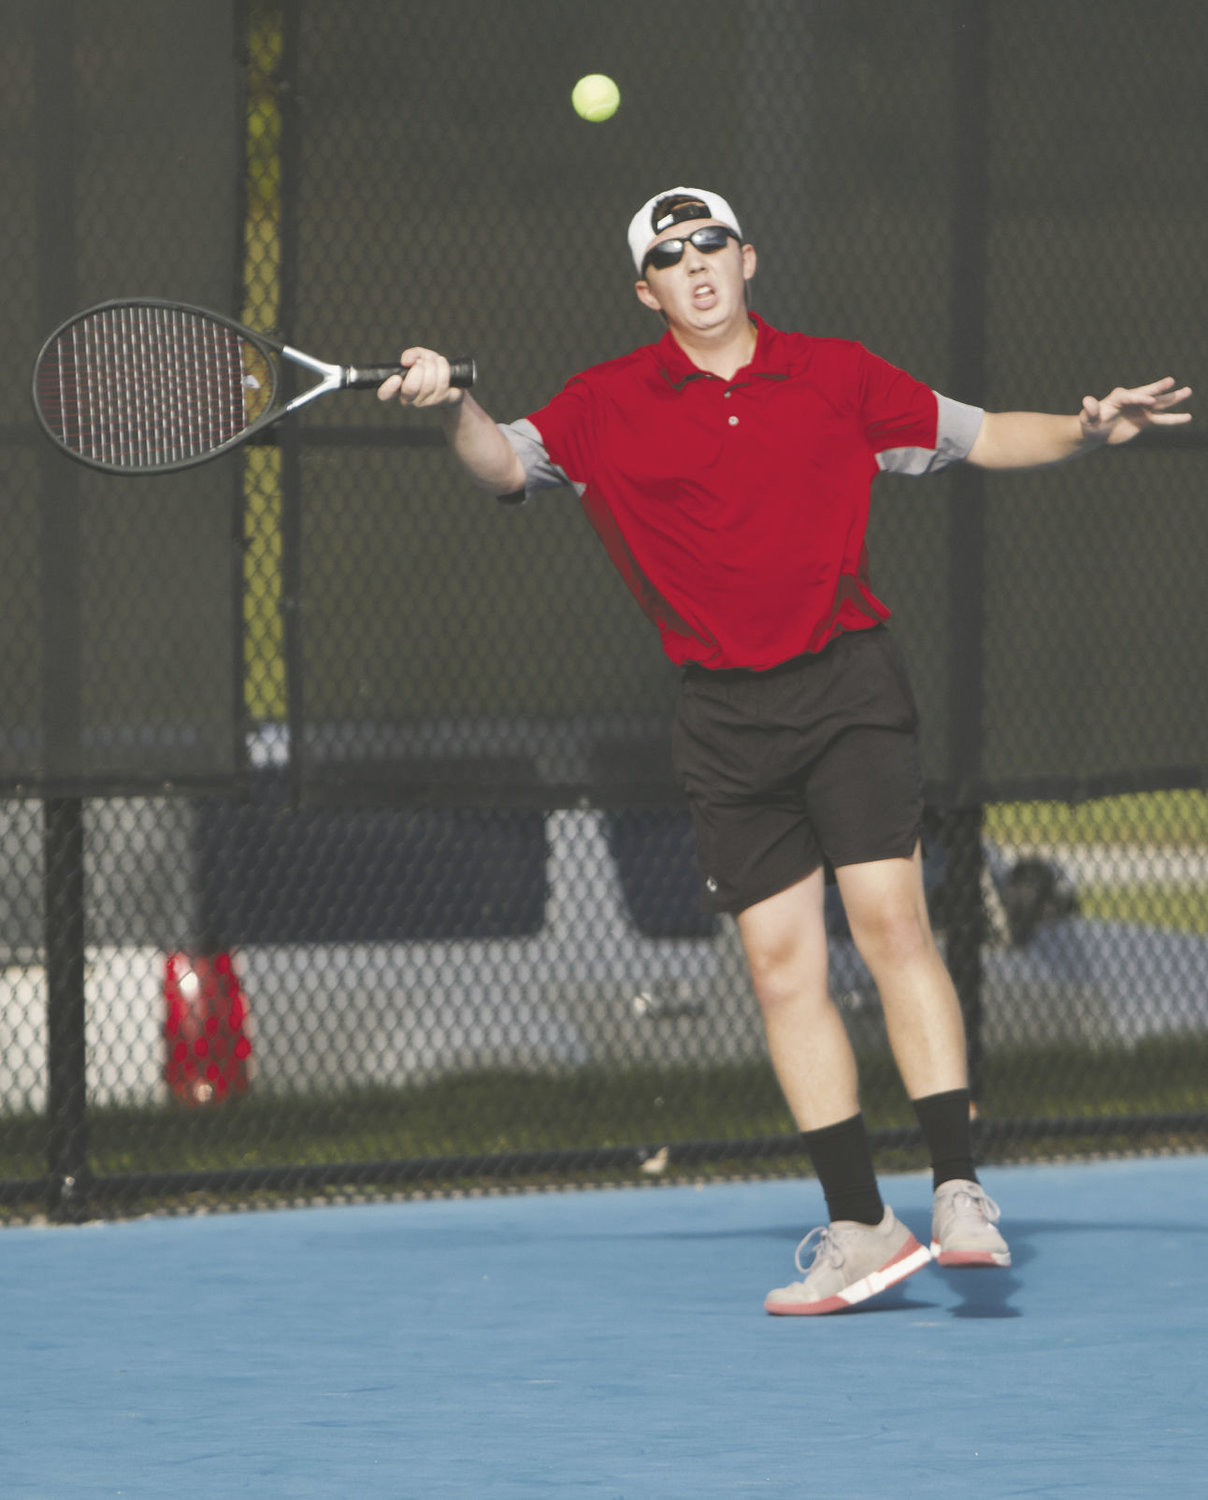 Trevor McKinney helped the Mountie's cause with a straight-set win at No. 2 singles.